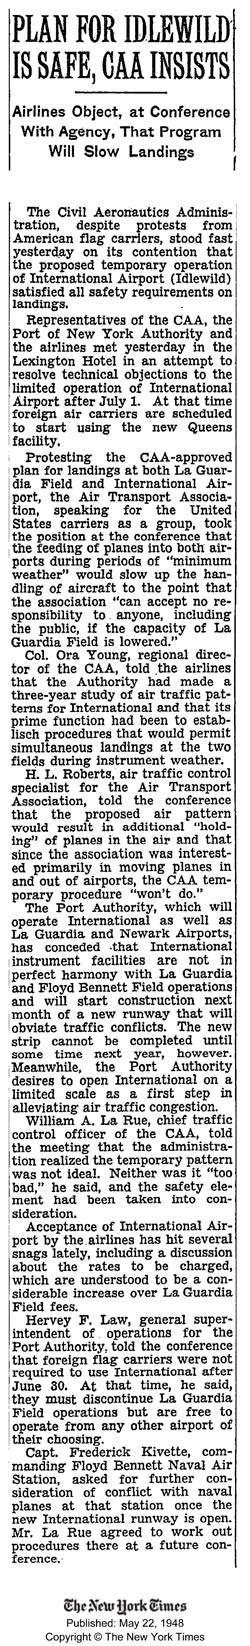 The New York Times, May 22, 1948 (Source: NYT)